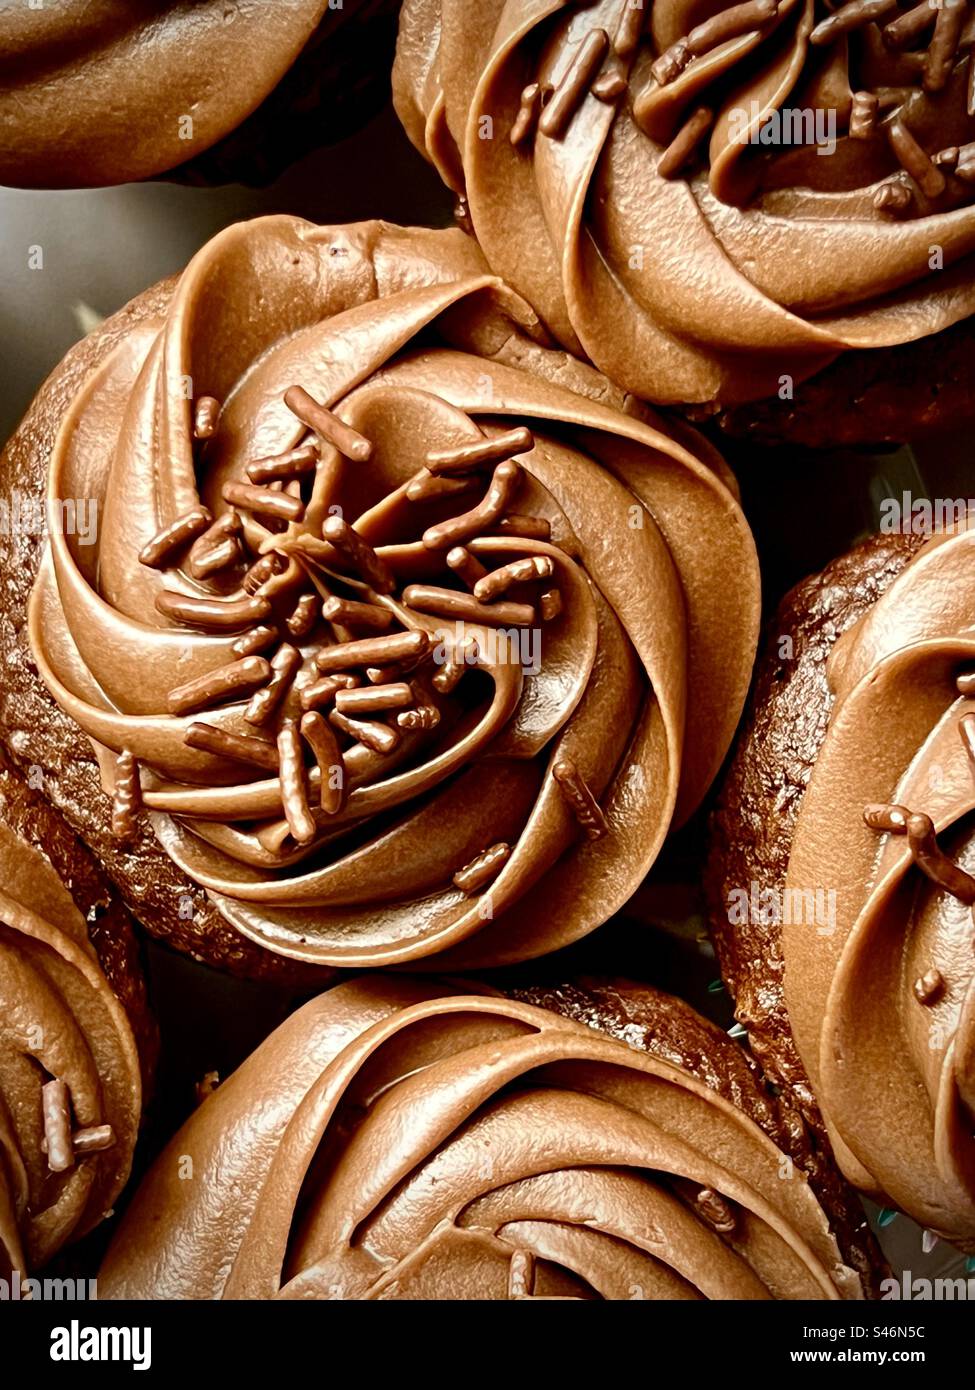 Chocolate cupcakes, top down view Stock Photo